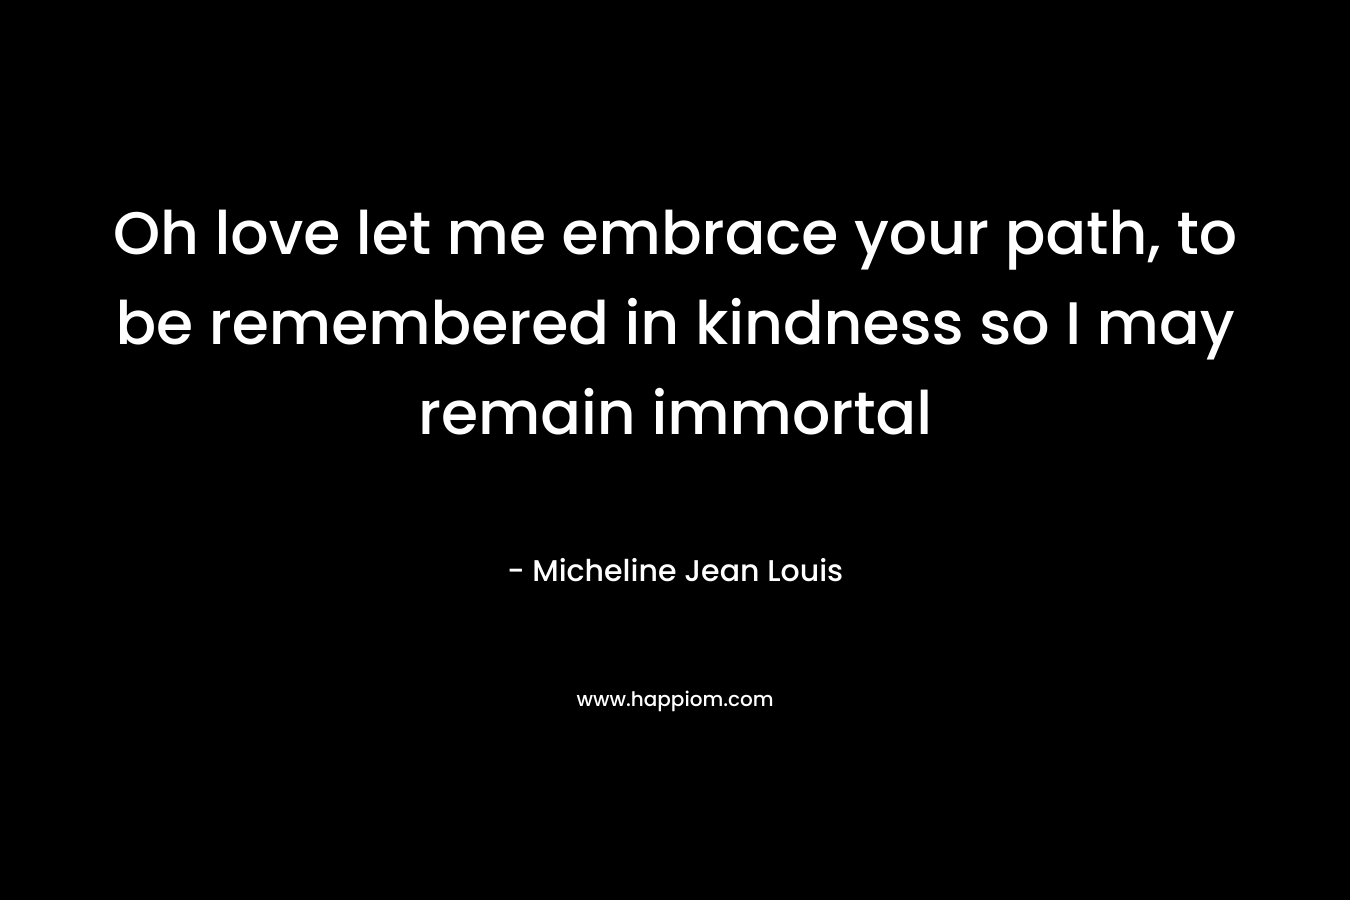 Oh love let me embrace your path, to be remembered in kindness so I may remain immortal